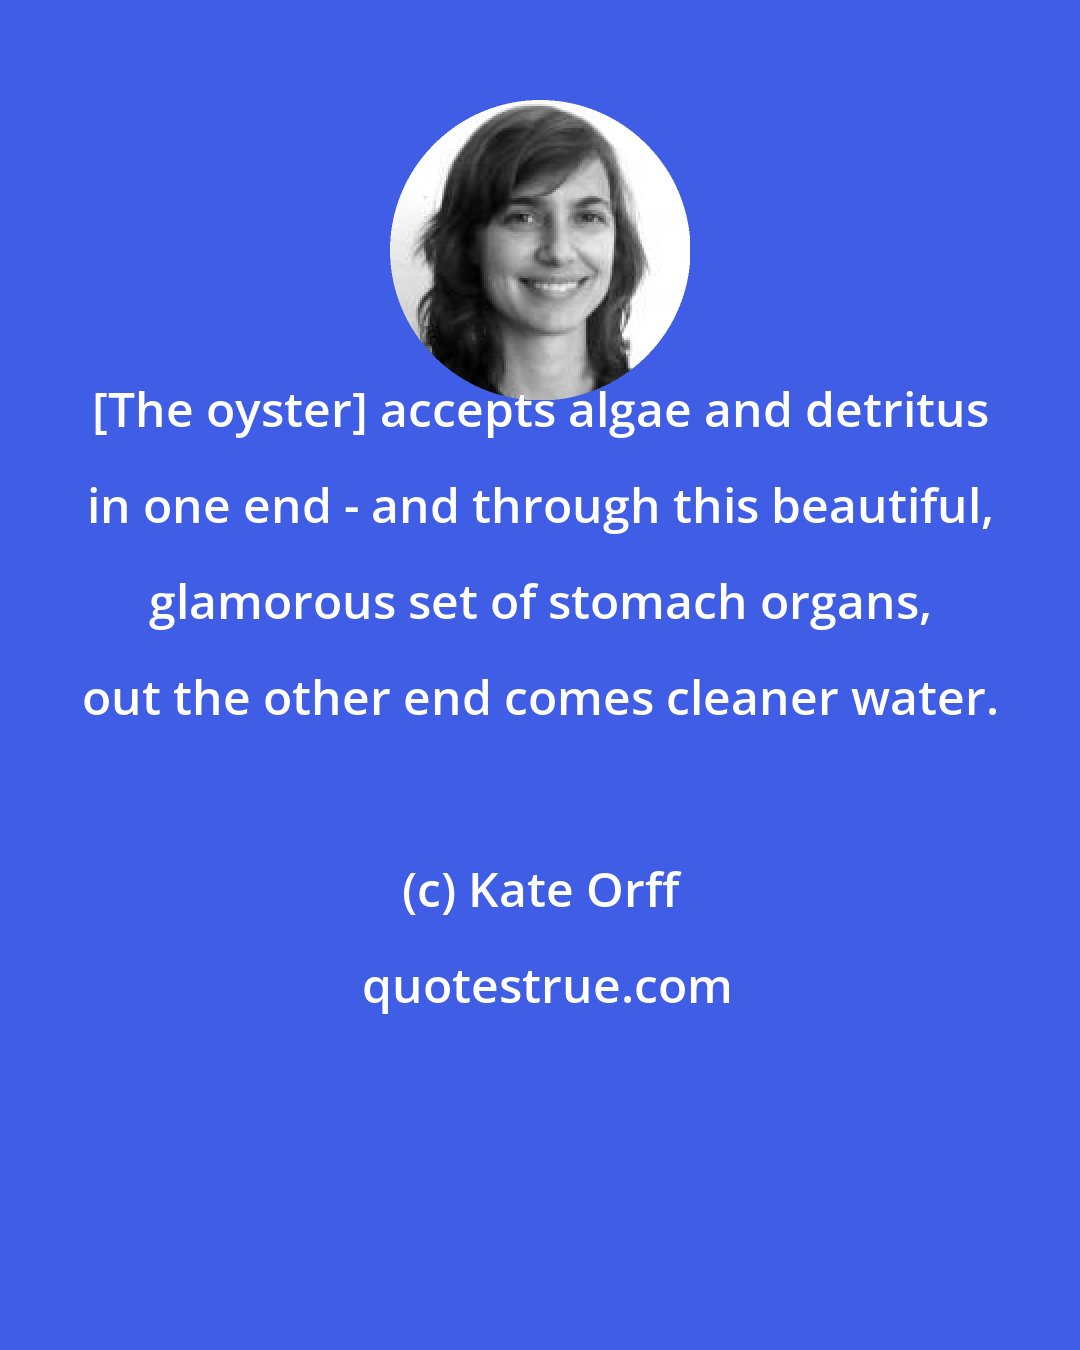 Kate Orff: [The oyster] accepts algae and detritus in one end - and through this beautiful, glamorous set of stomach organs, out the other end comes cleaner water.